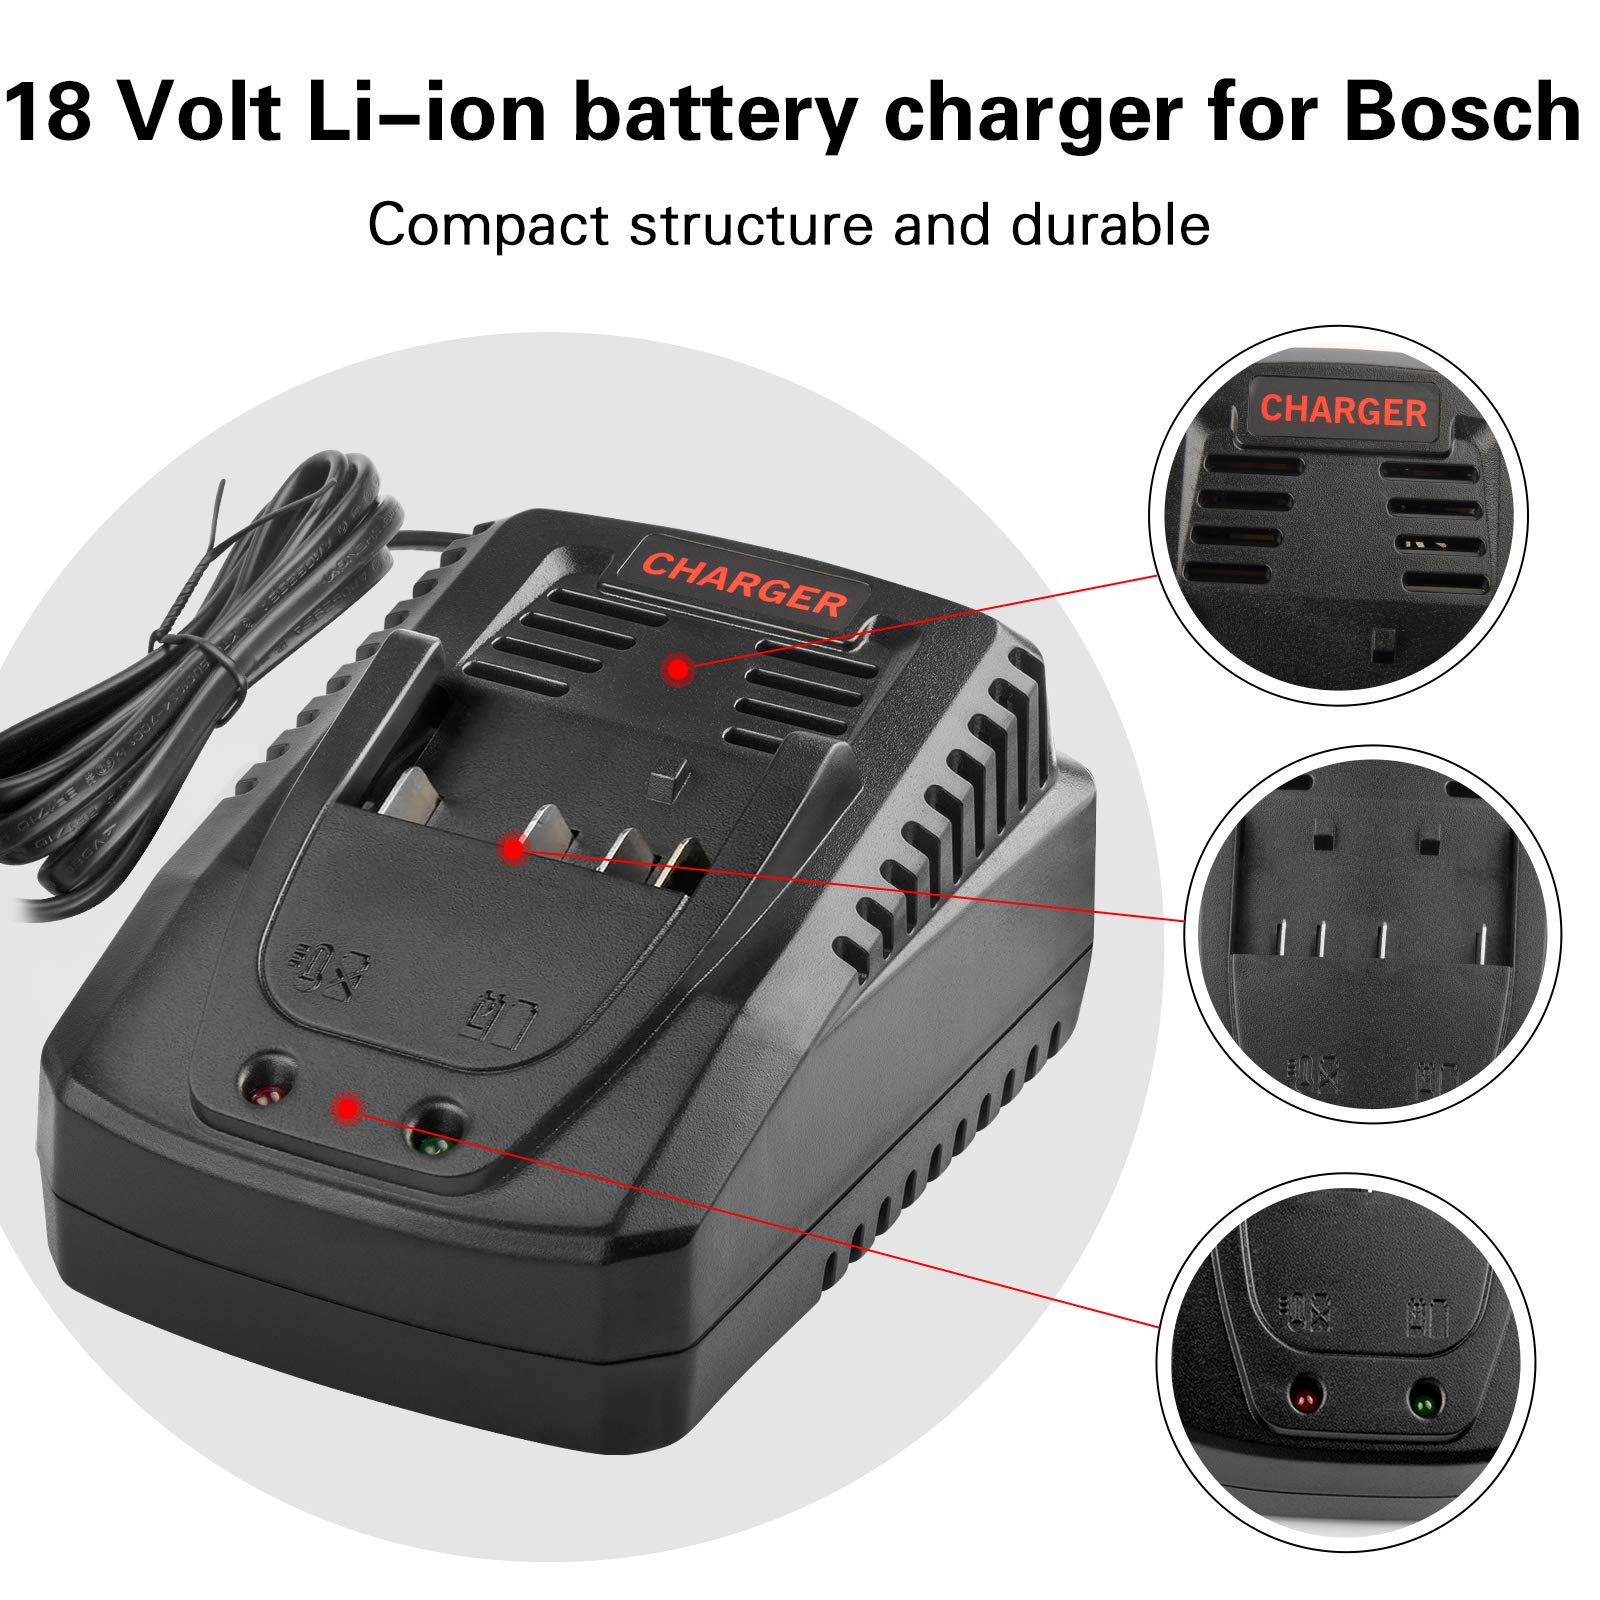 Quick BC660 BC1880 Charger for Bosch Tools 14.4V-18V Lithium Battery BAT619G, BAT619, BAT609G, BAT609, BAT618, BAT618G, BAT610G BAT614 etc.